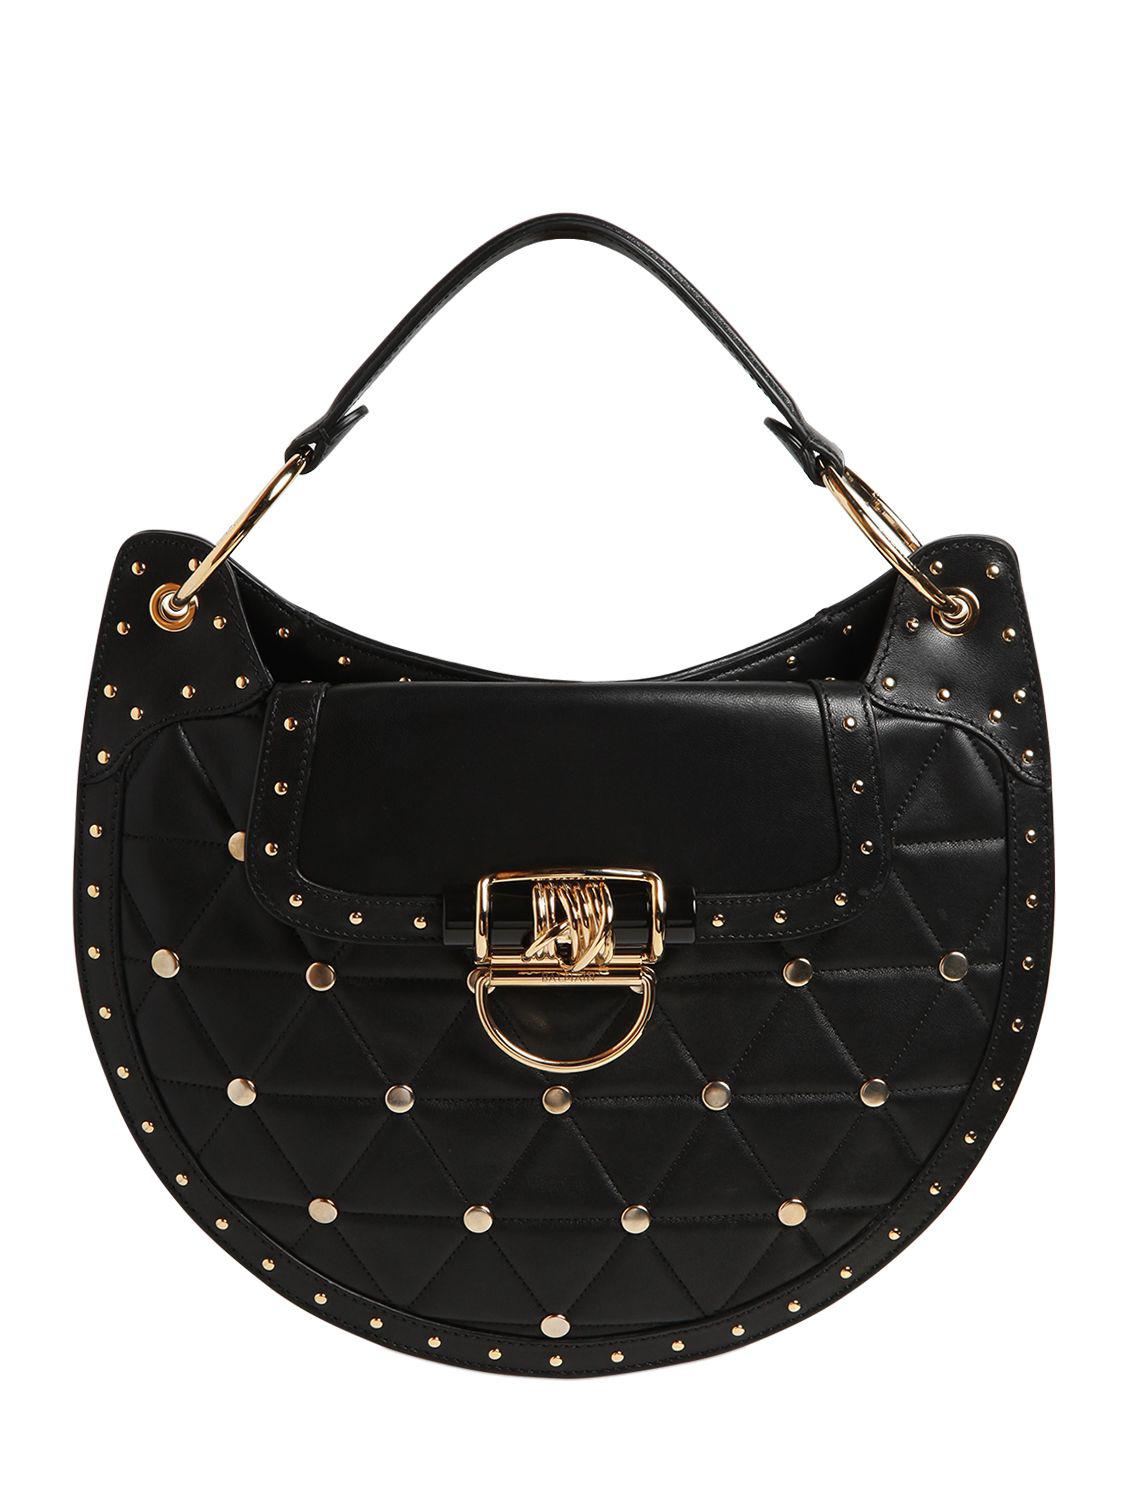 Download Balmain Medium Quilted Leather Bag W/ Studs in Black - Lyst